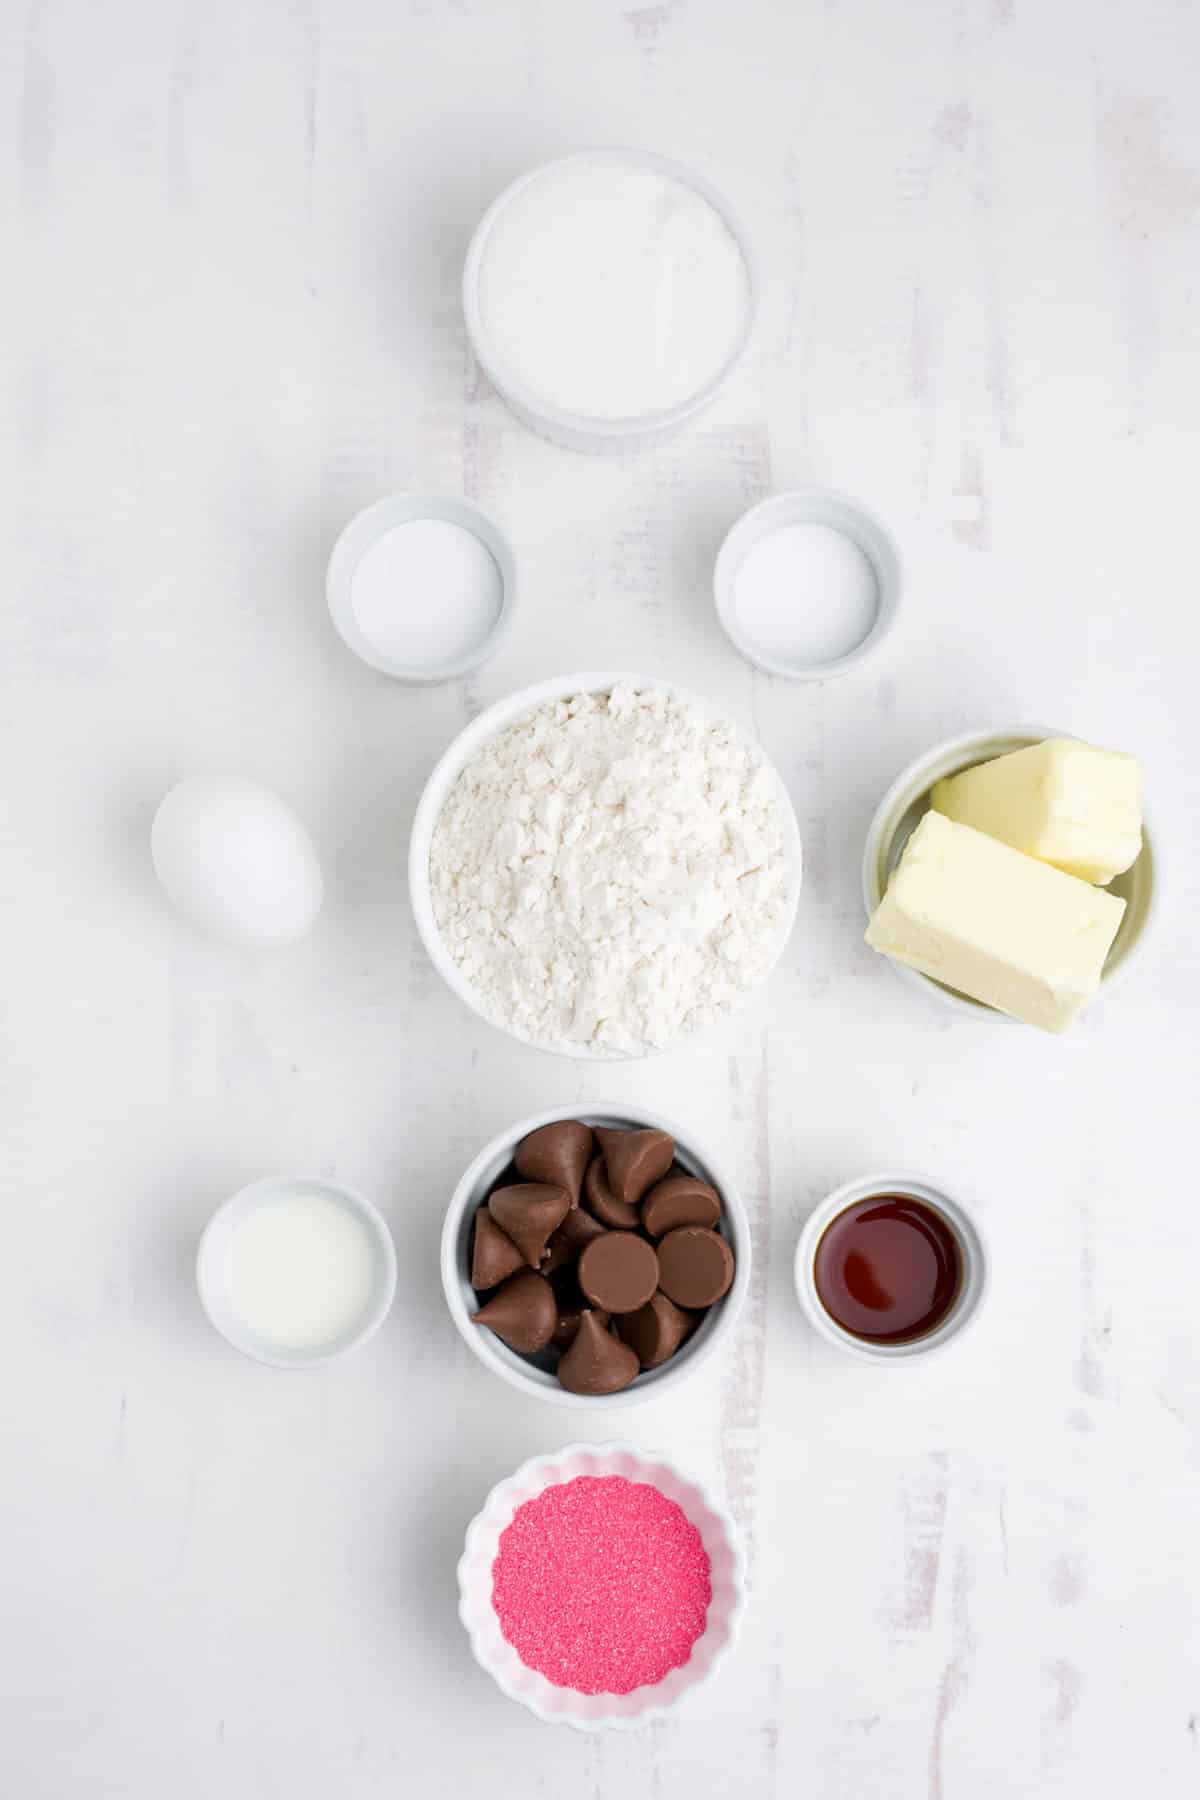 Ingredients to make spring blossom cookies on the table.